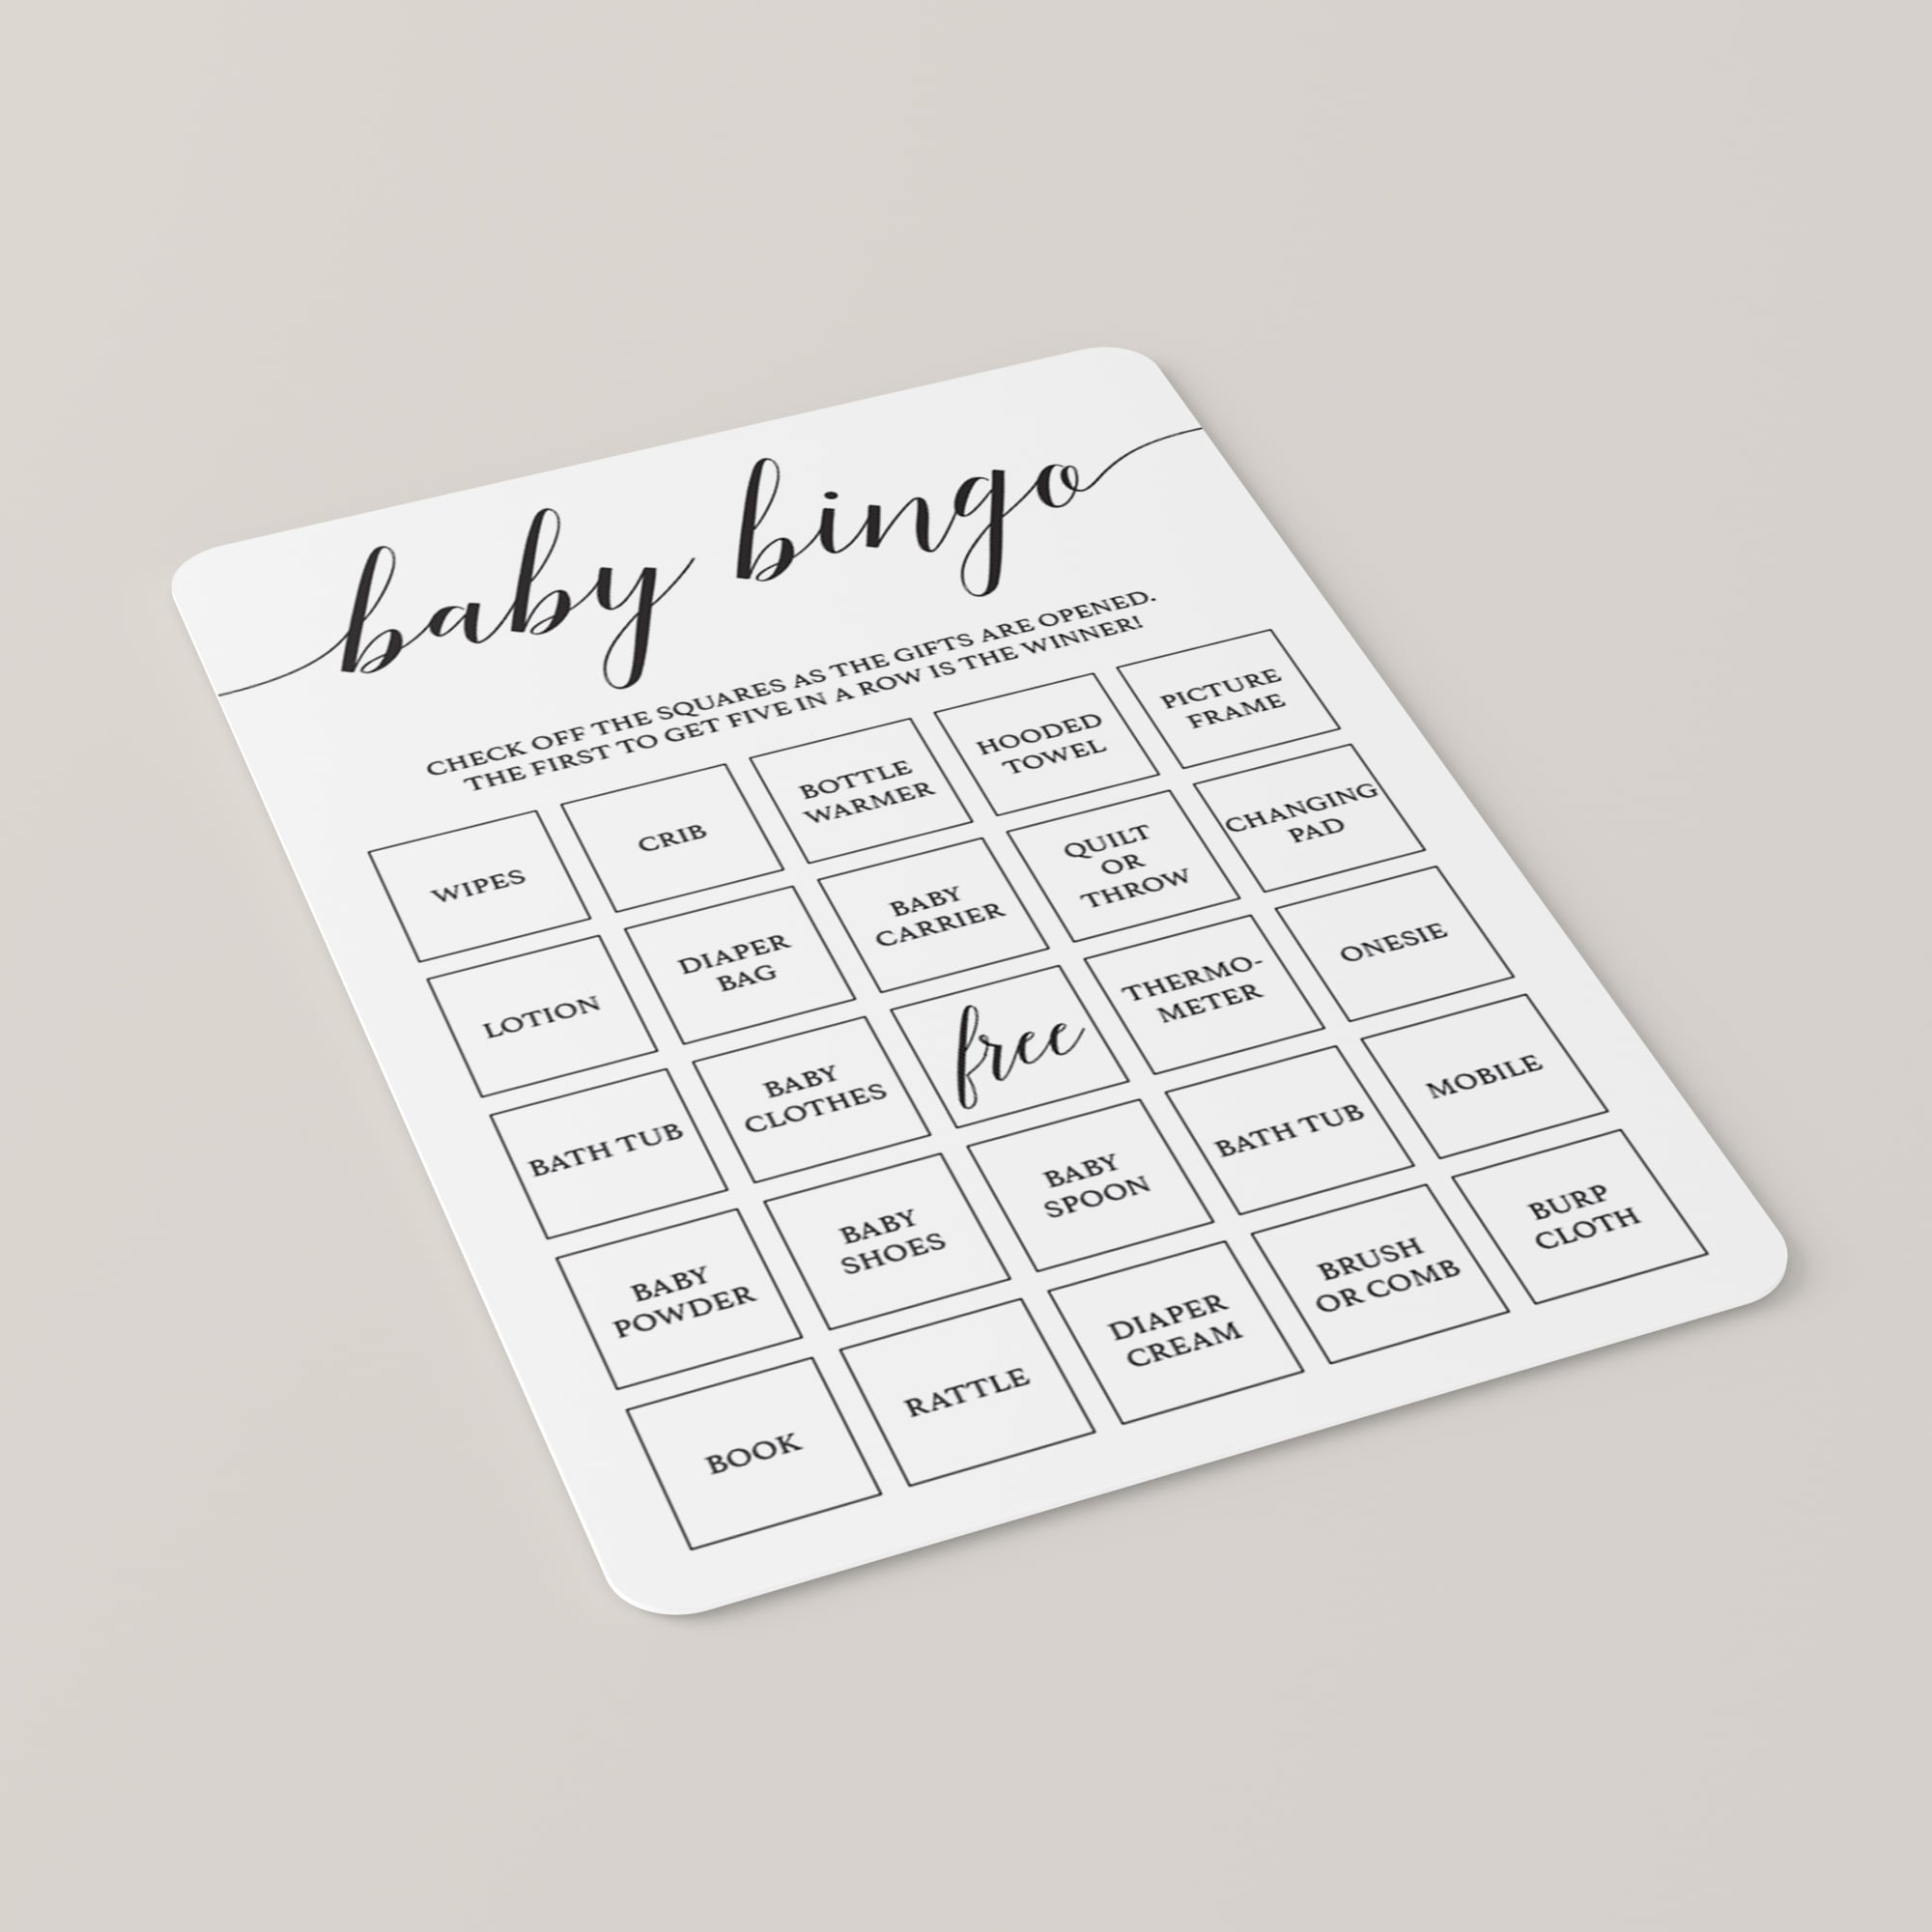 Blank baby shower bingo cards black and white printable by LittleSizzle